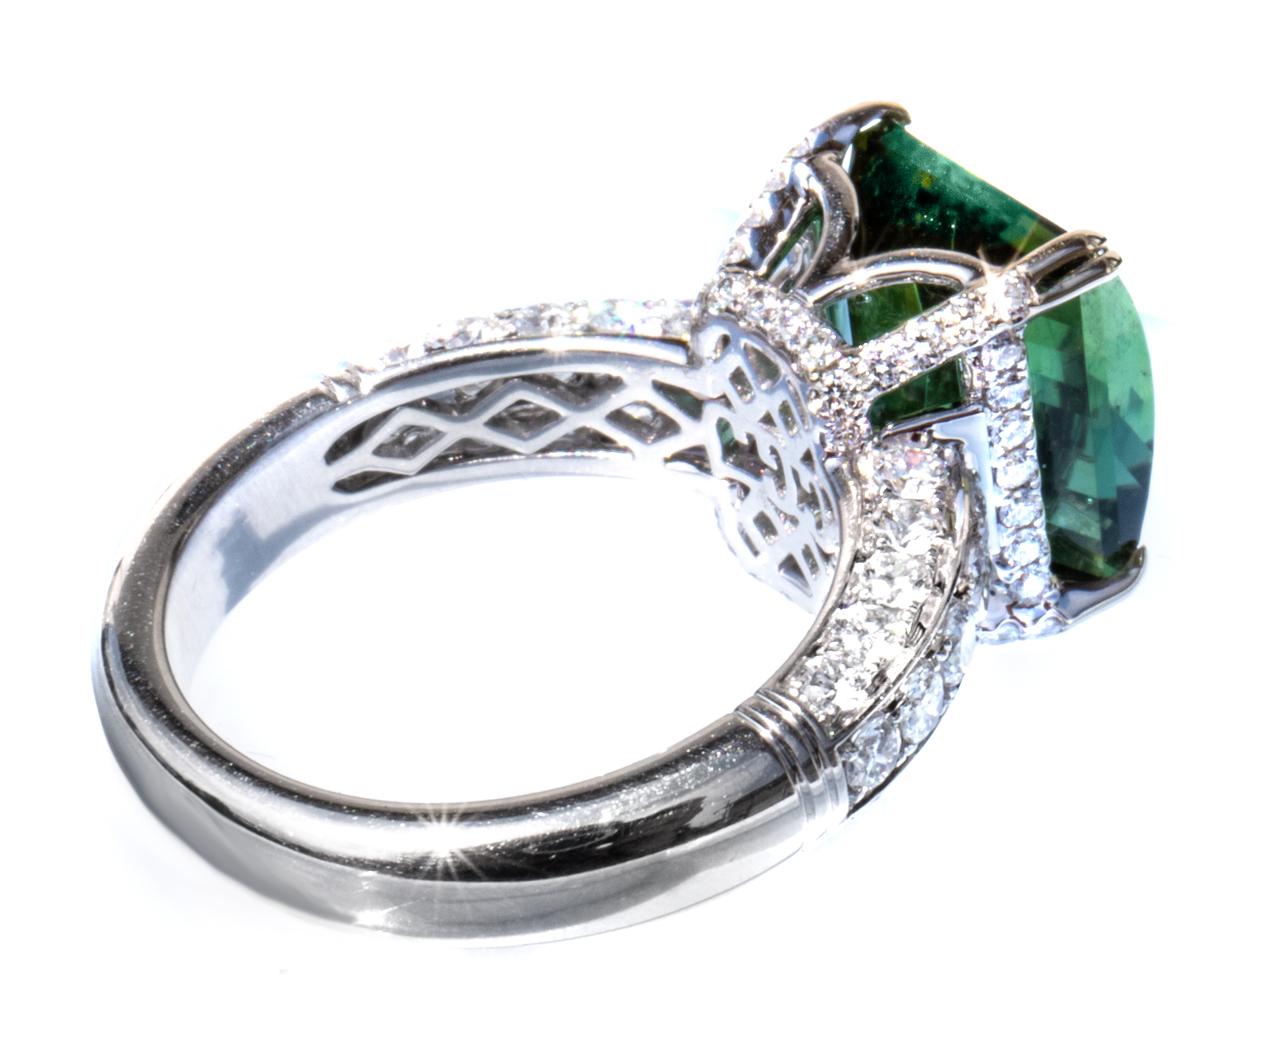 This is one of our newest rings. It's rare too!  Did you know tourmalines come in over 16,000 colors. This is a bicolor indicolite (bluish) tourmaline. One half is bluish green (slightly greener); the other half is greenish blue (slightly bluer).